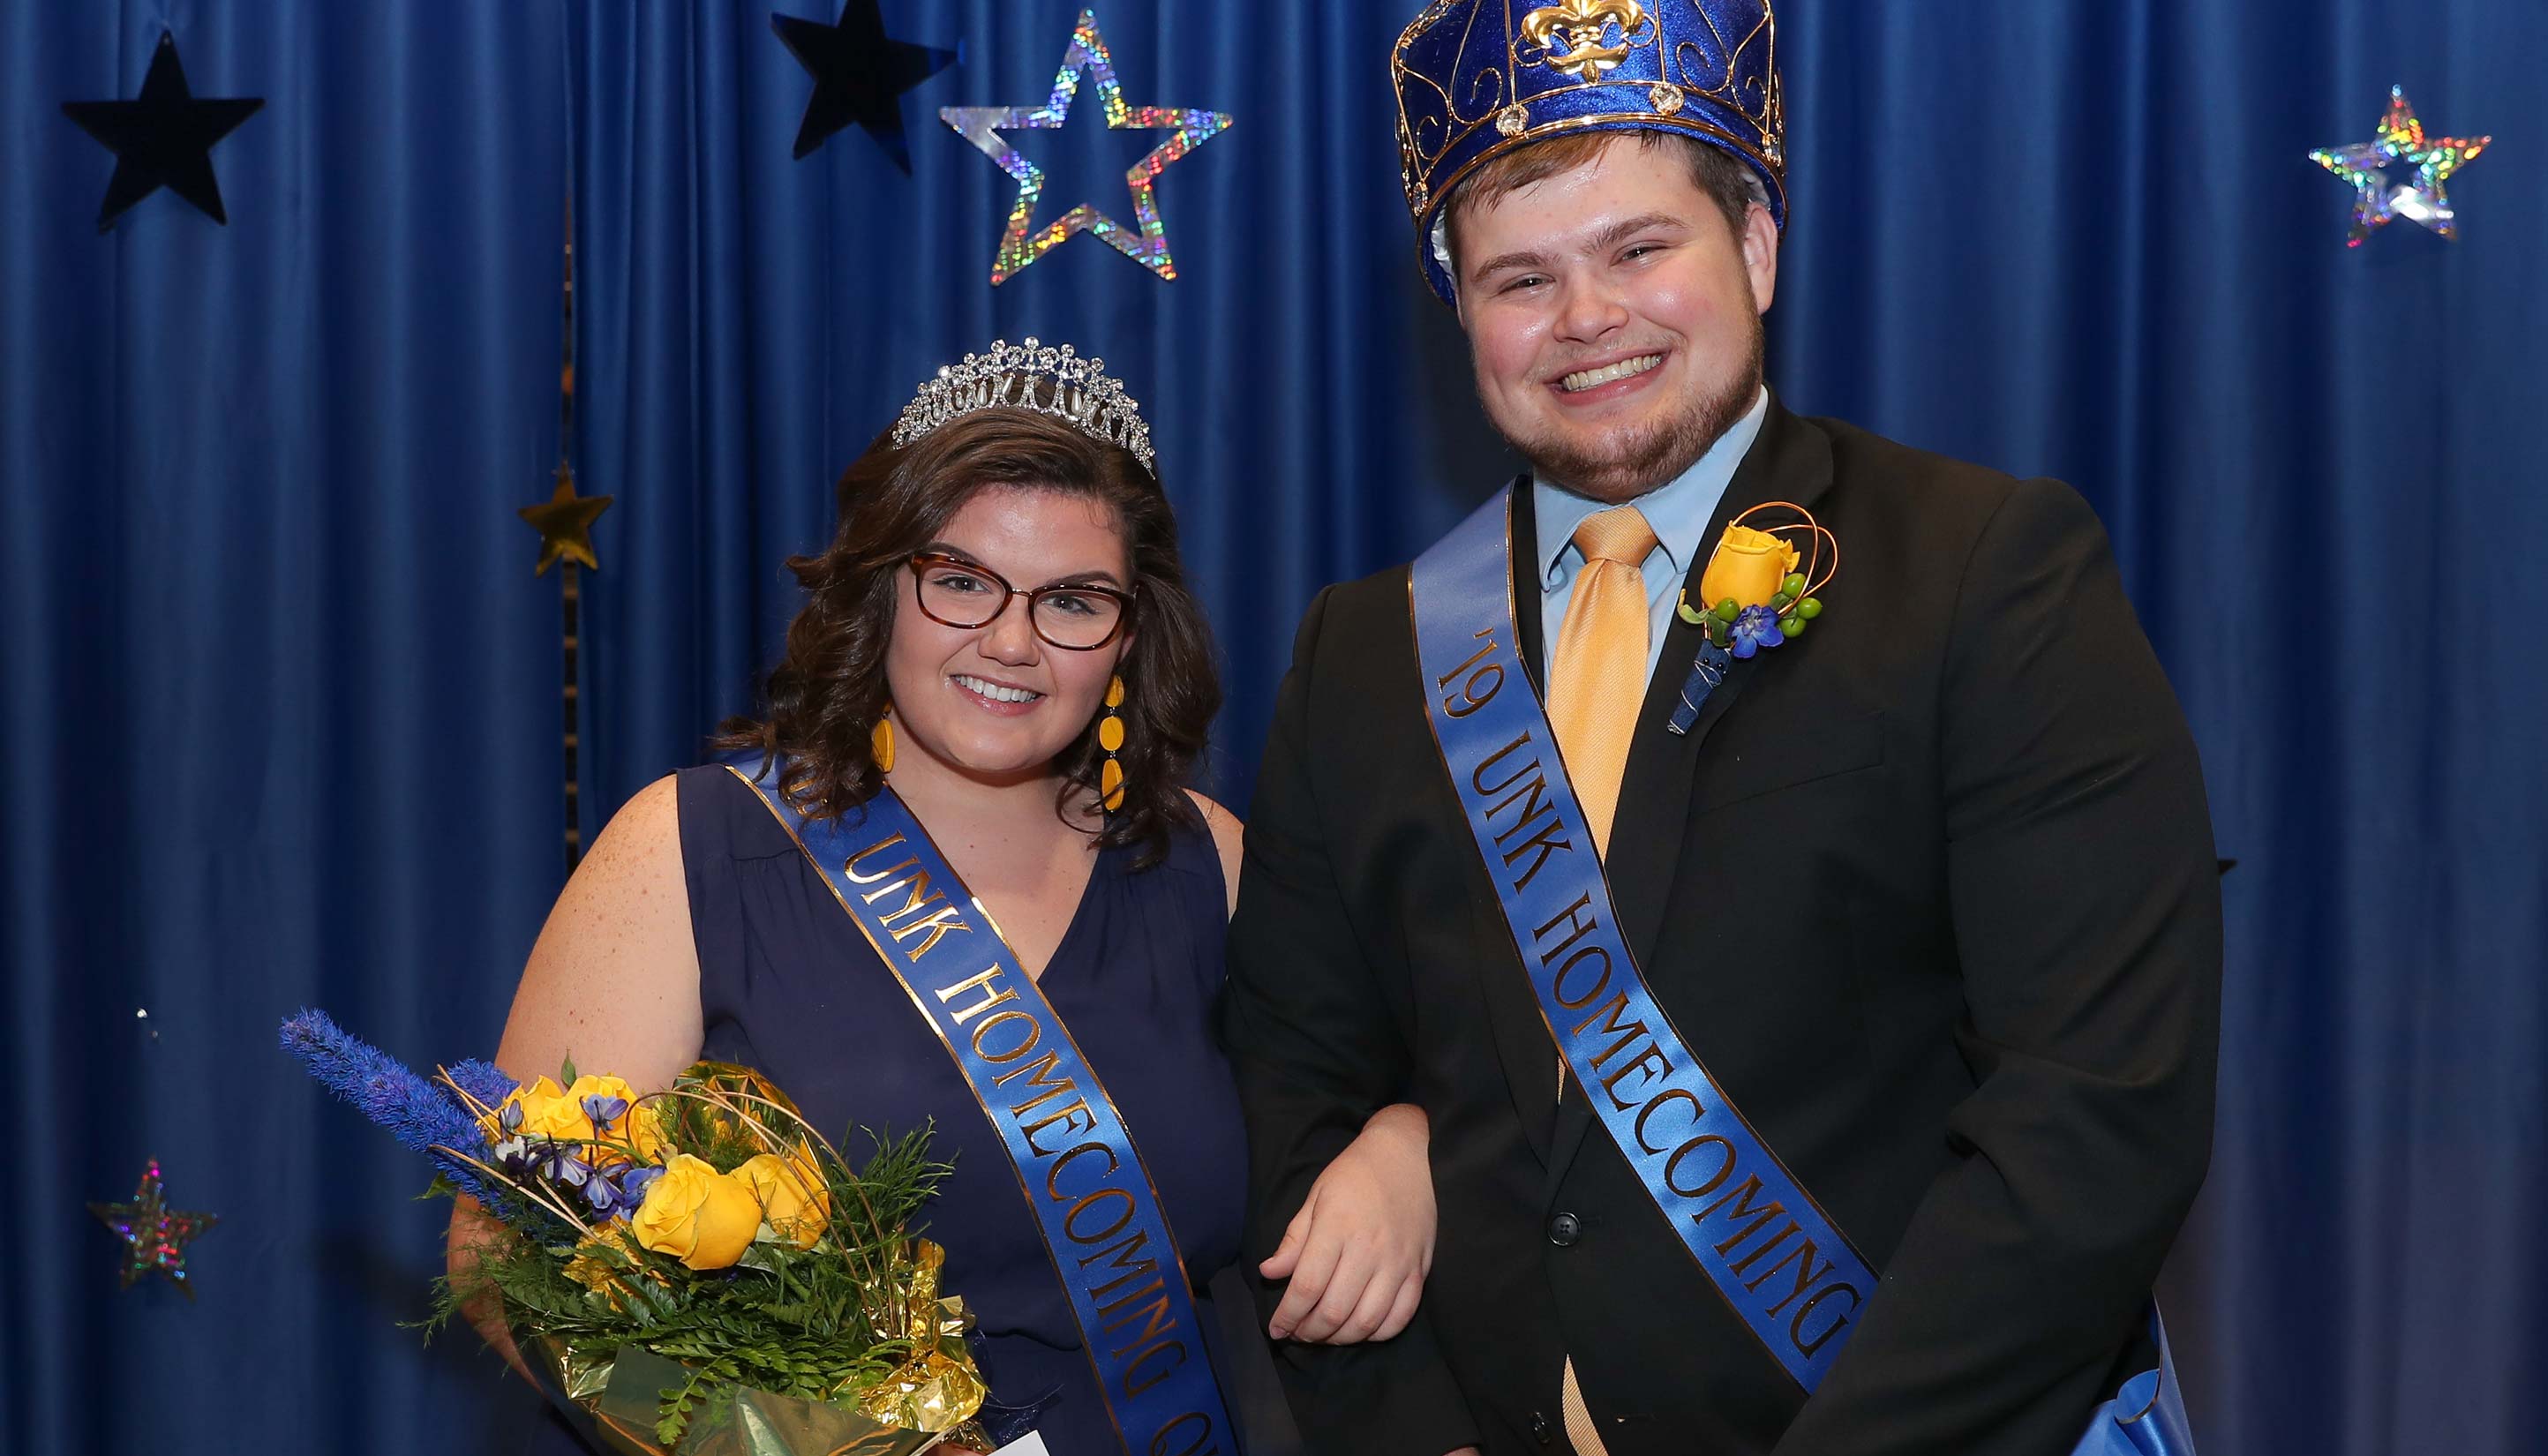 Jacob Roth, Makenzie Petersen crowned UNK homecoming royalty – UNK News